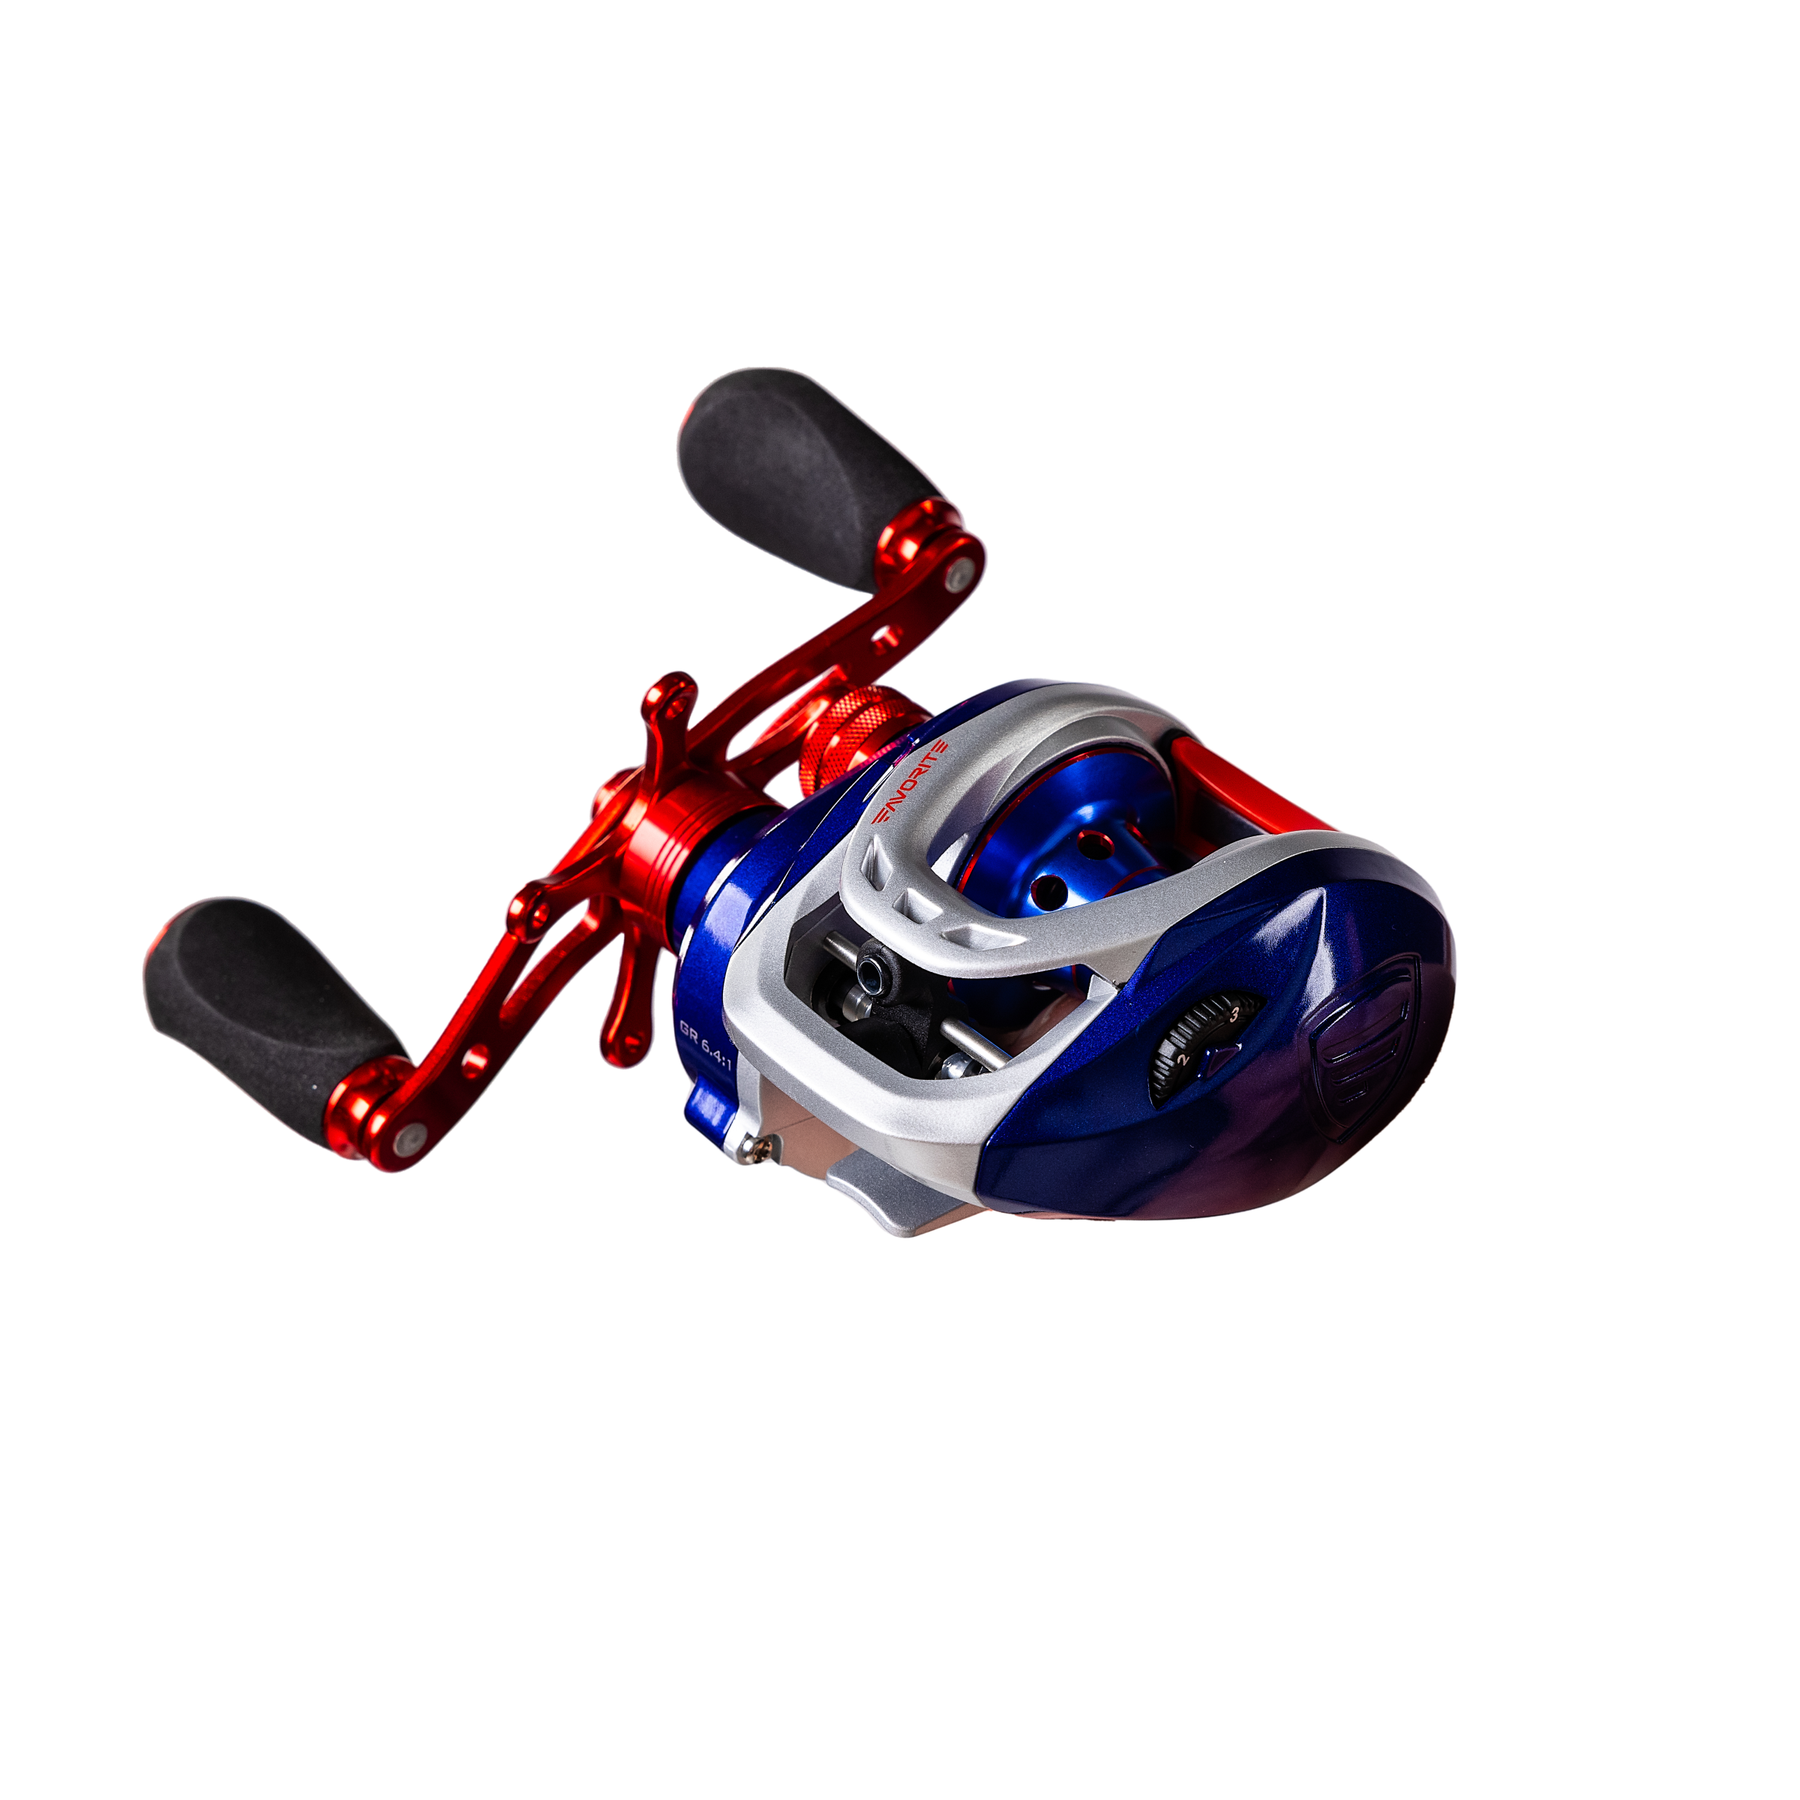 Favorite Fishing Defender Casting Reel with Free S&H — CampSaver